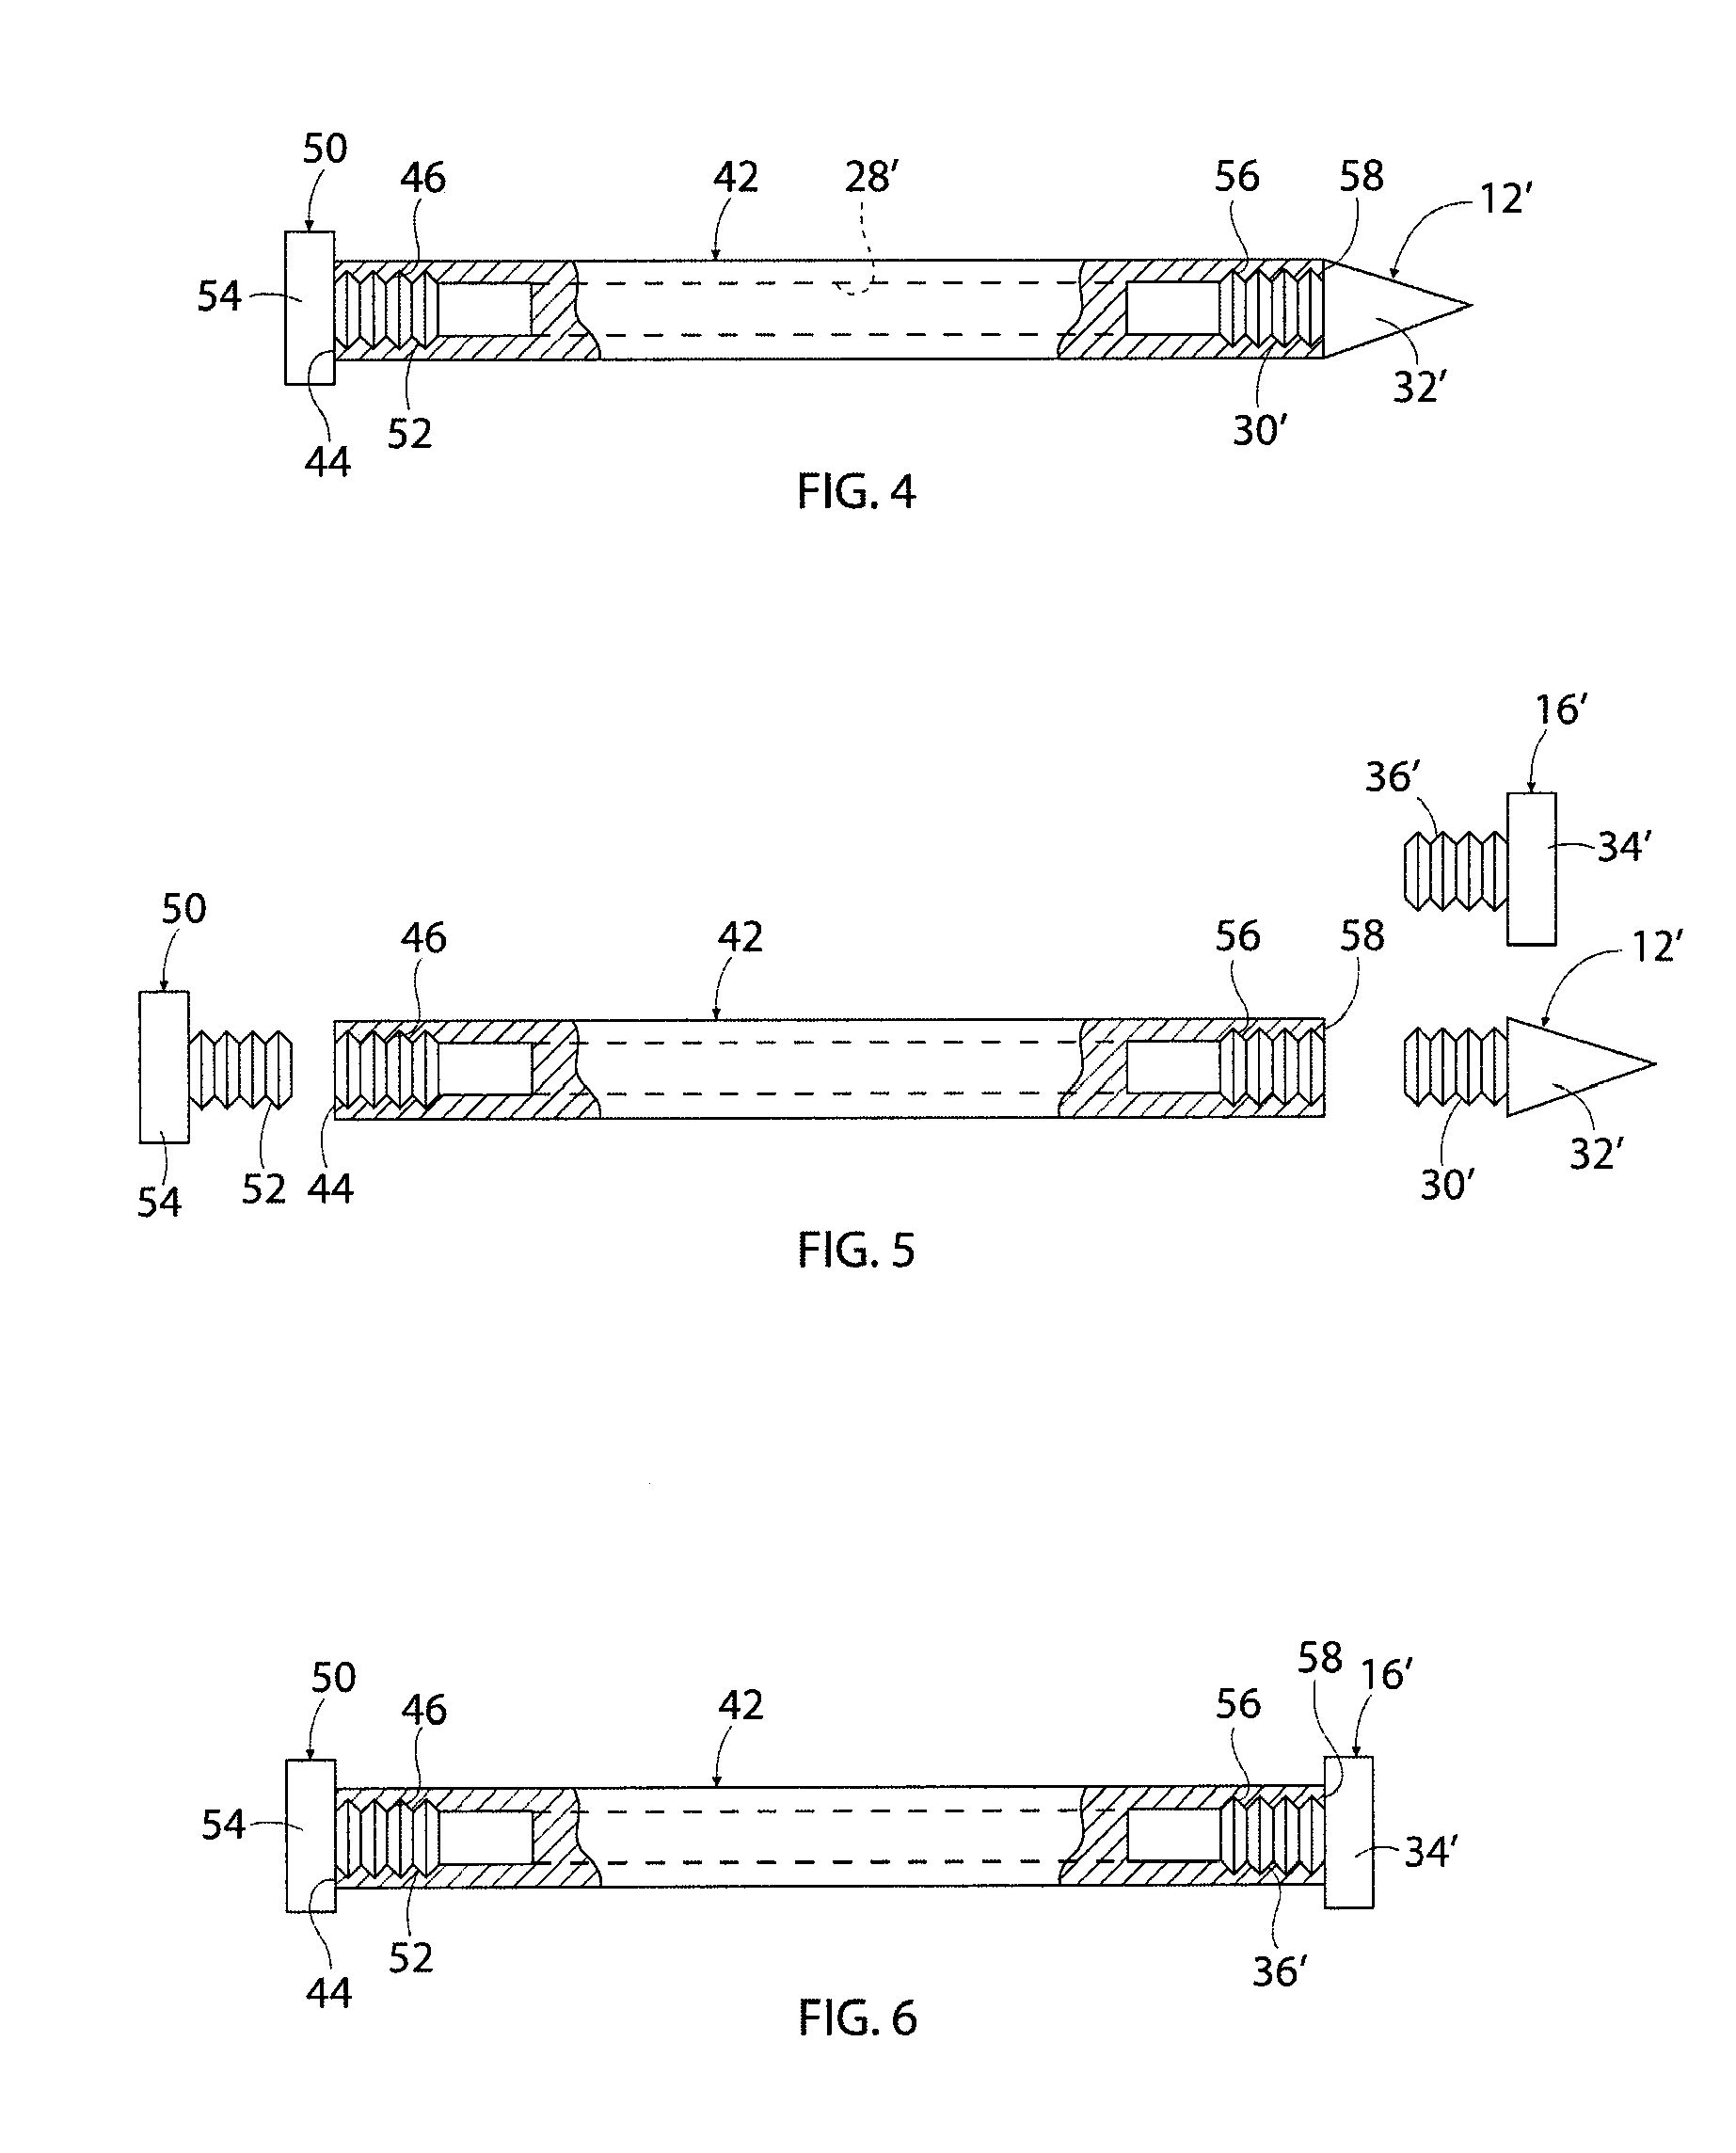 Bone Bolt Assembly for Attaching Supporting Implants to Bones, for Holding Multiple Bones in Relative Positions, and for Holding Together Fractured Bone Fragments